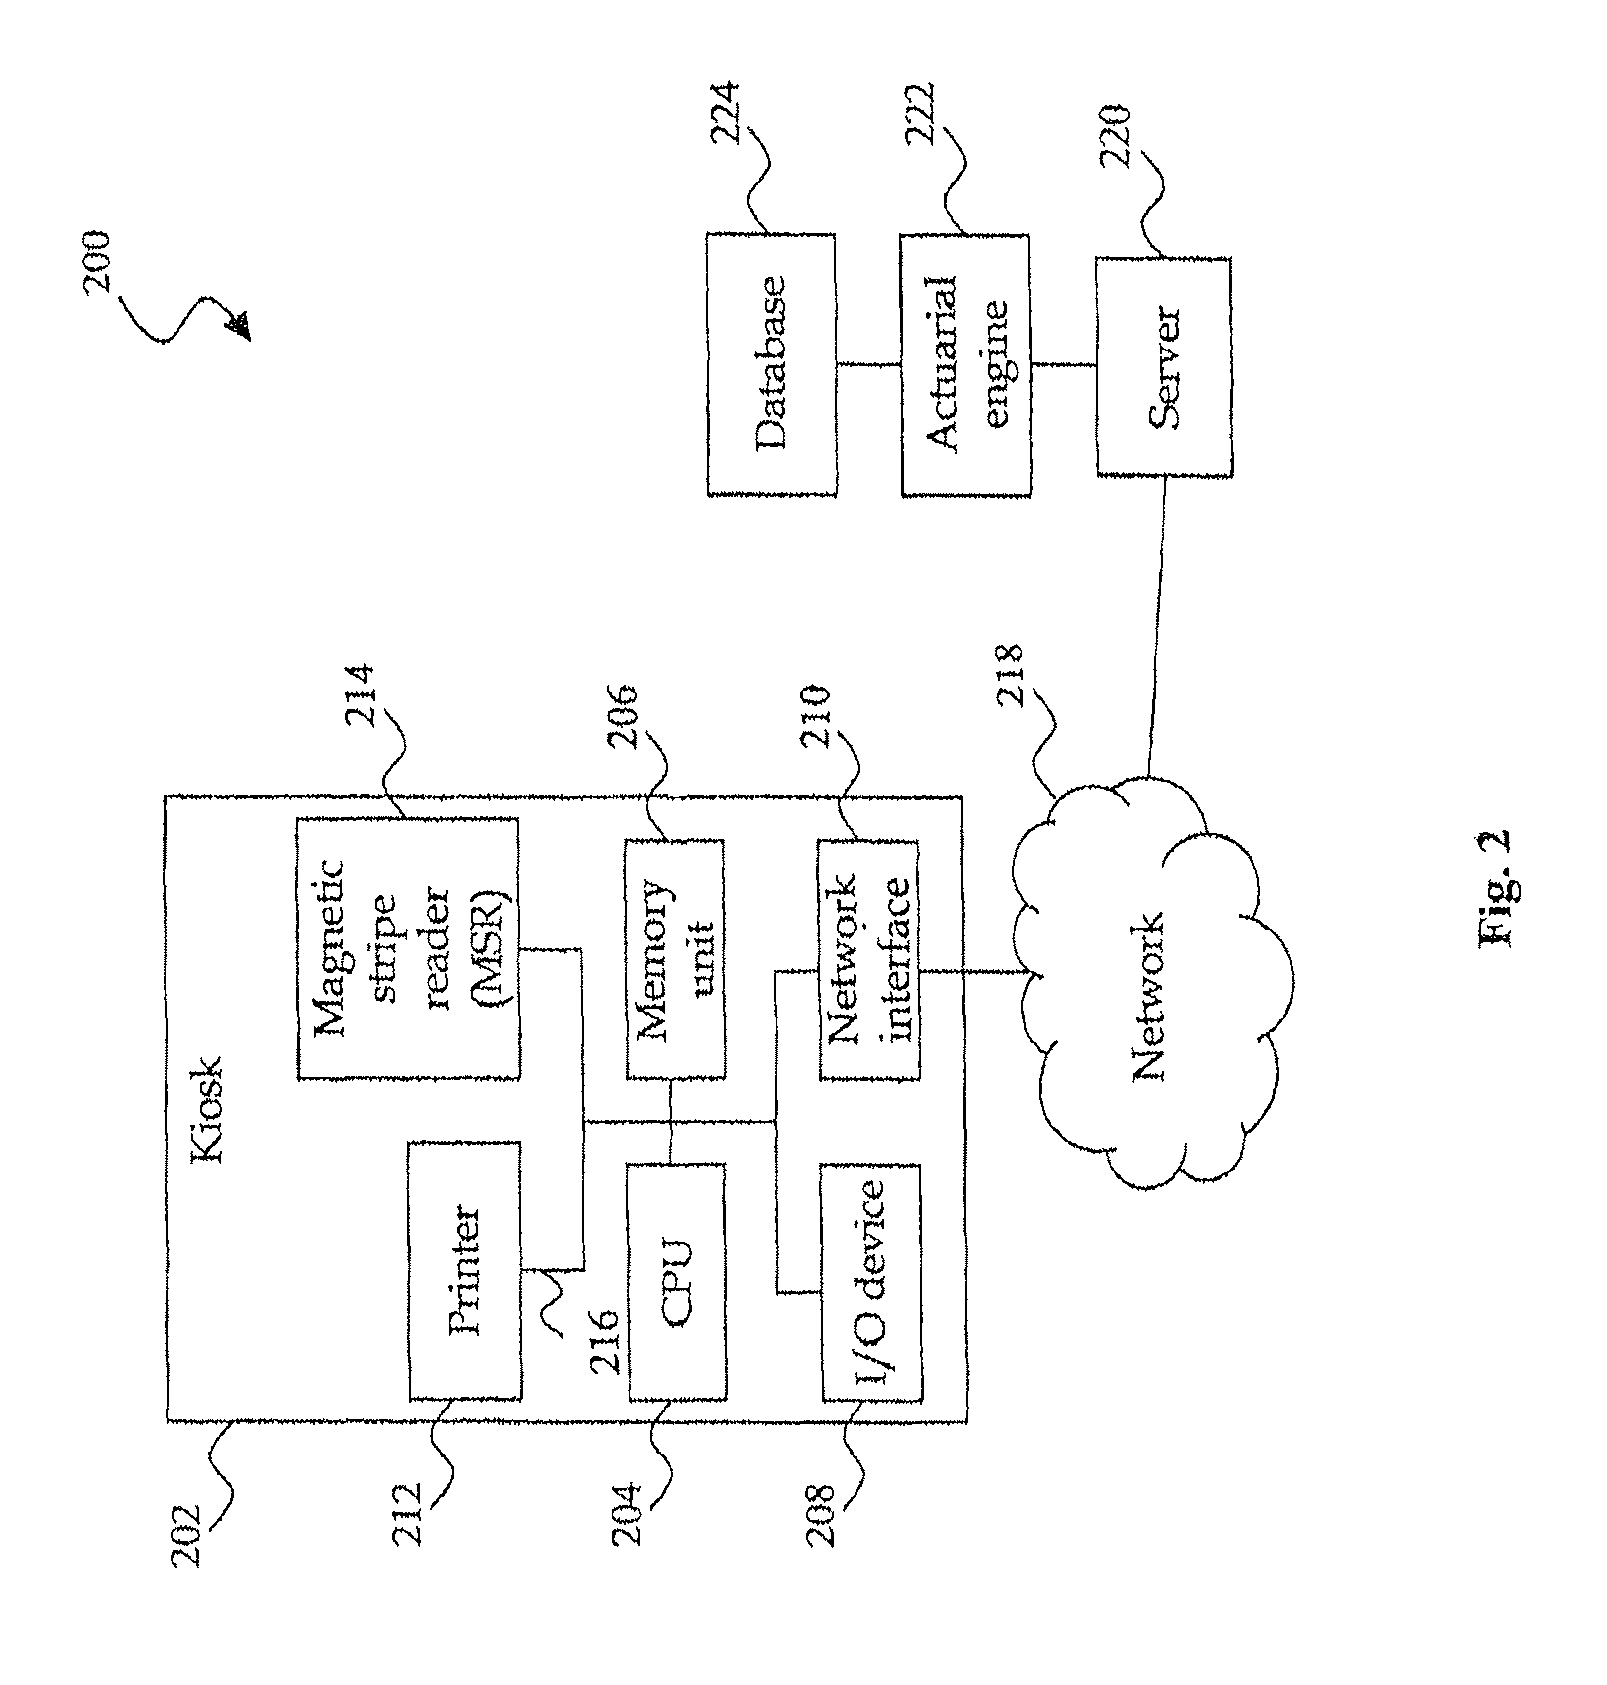 System and method for the assessment, pricing, and provisioning of distance-based vehicle insurance